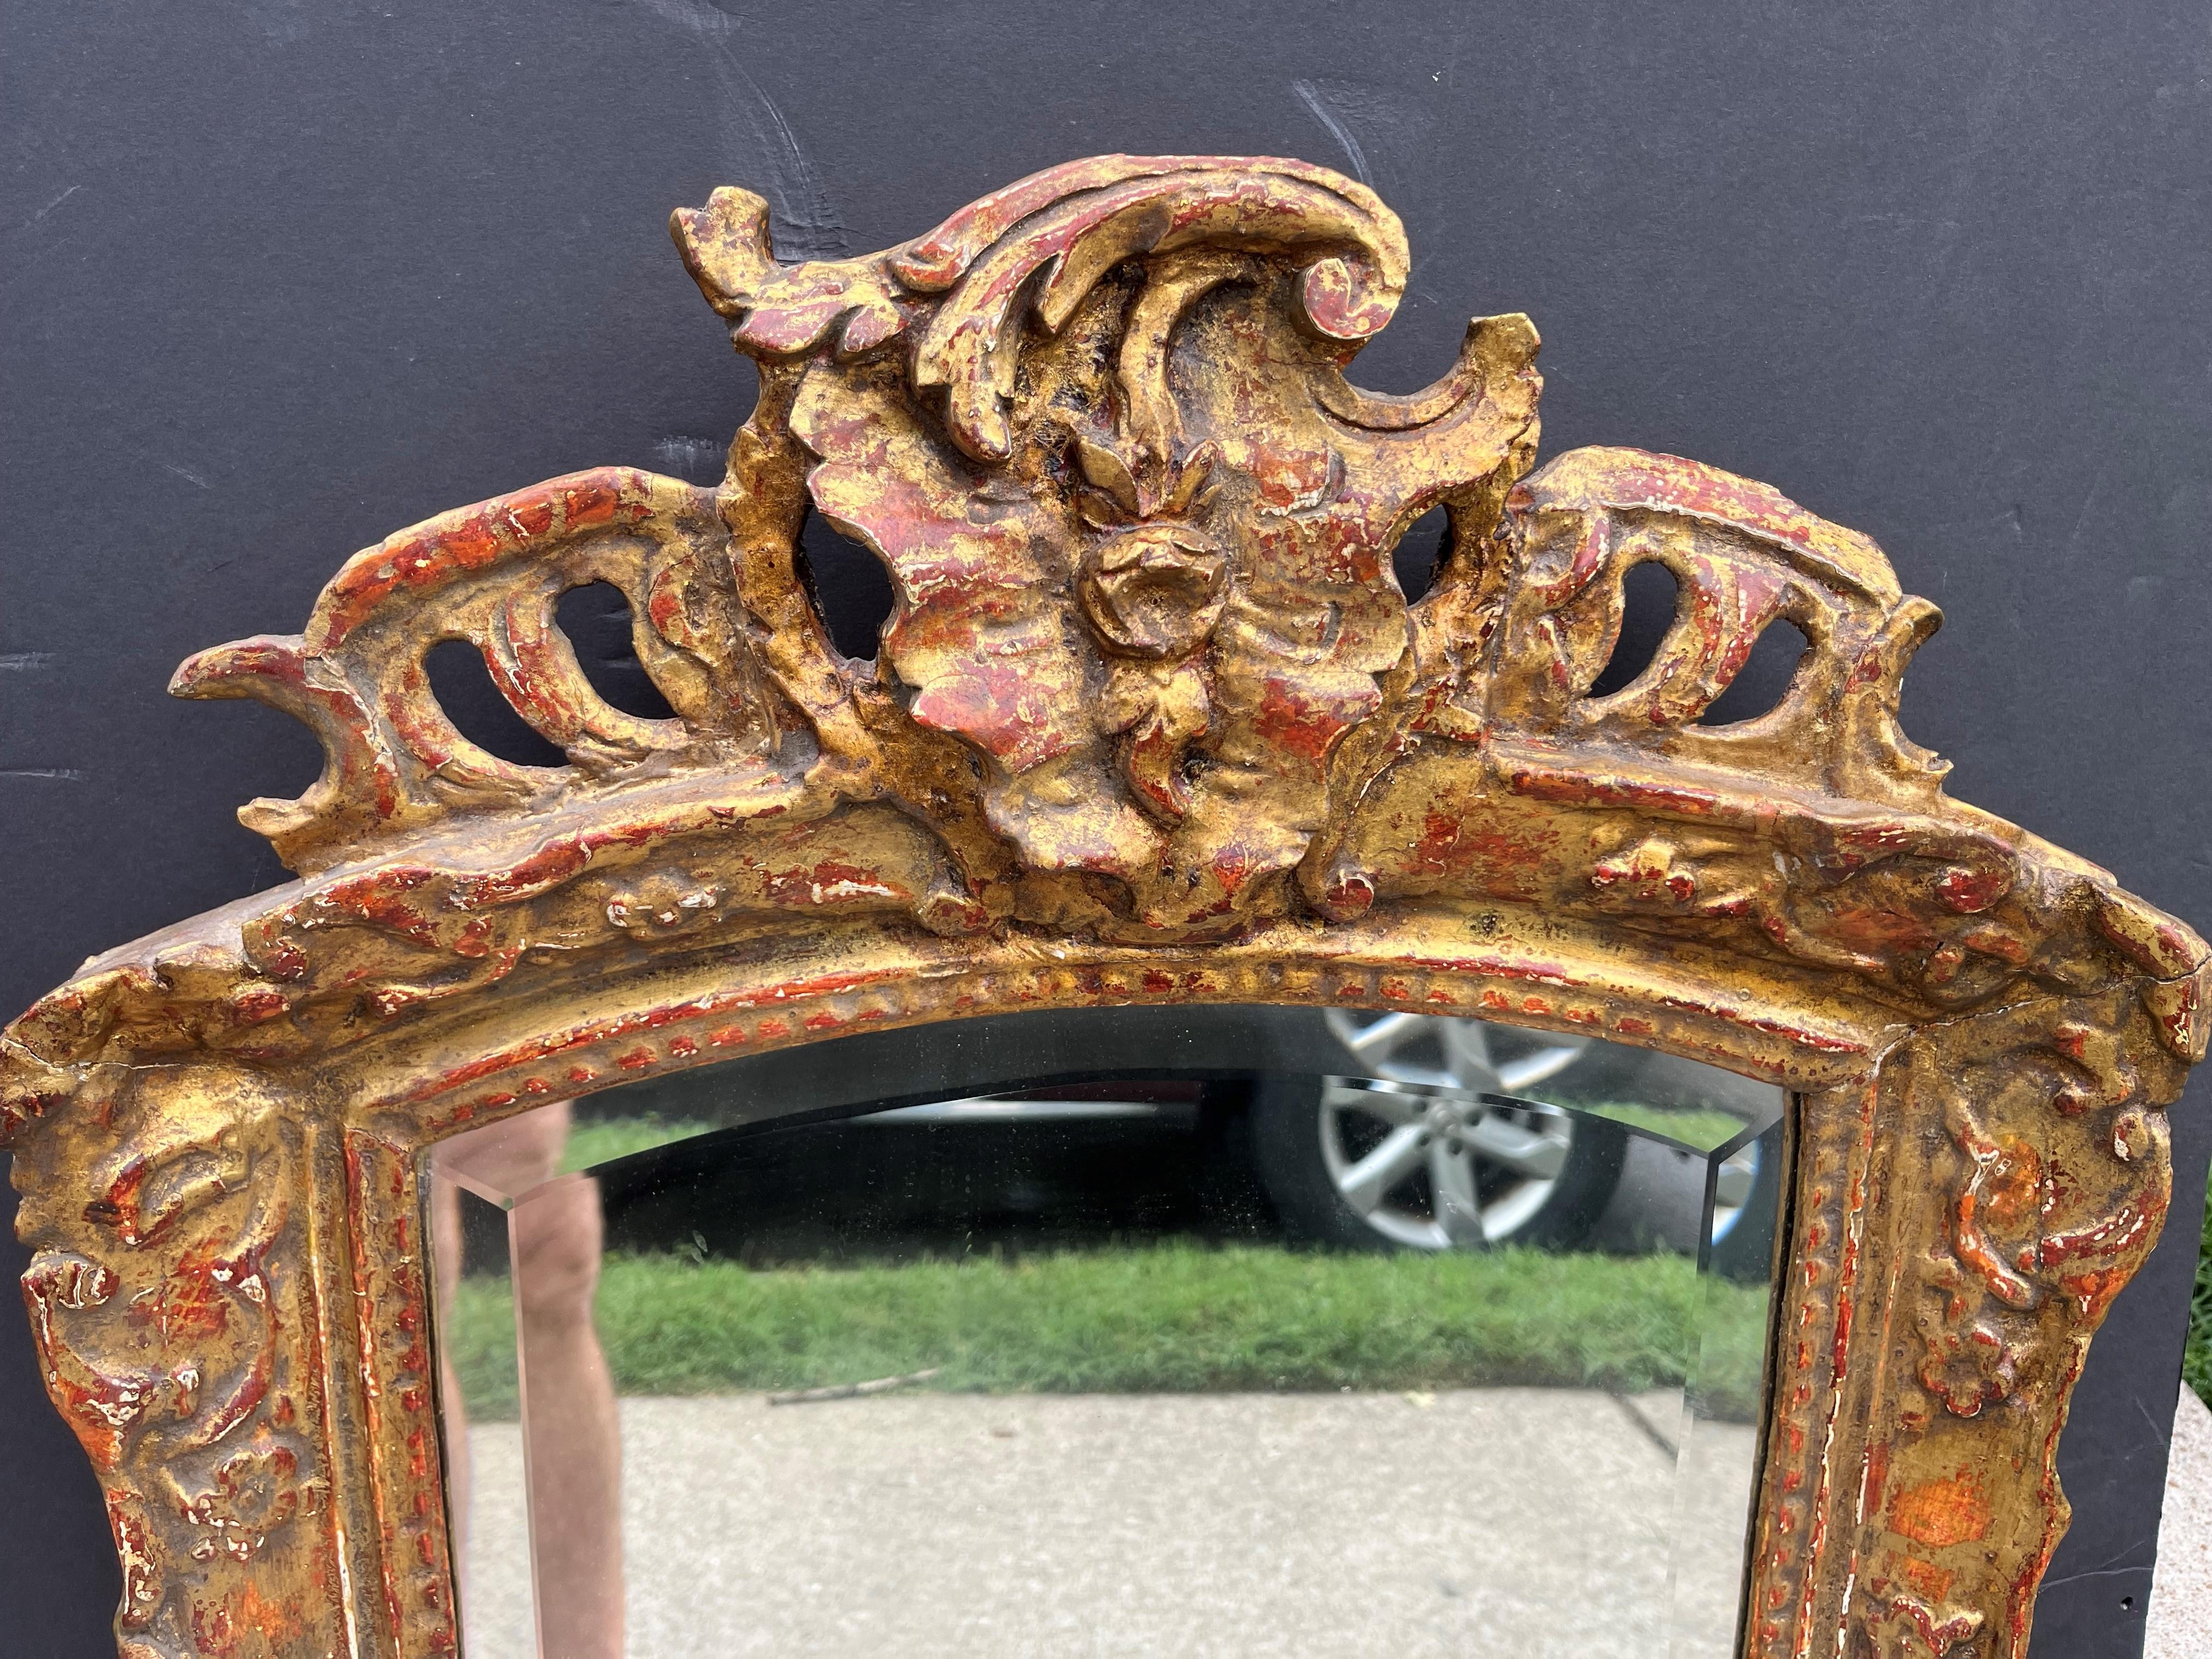  With later beveled plate .The whole with pierced crest, floral or foliate motifs and 'c' scrolls throughout. Touchups to gilt. Extensive bleeding of the bole in three charming colors, the usual Venetian red, a more Italian orange and a Chinese